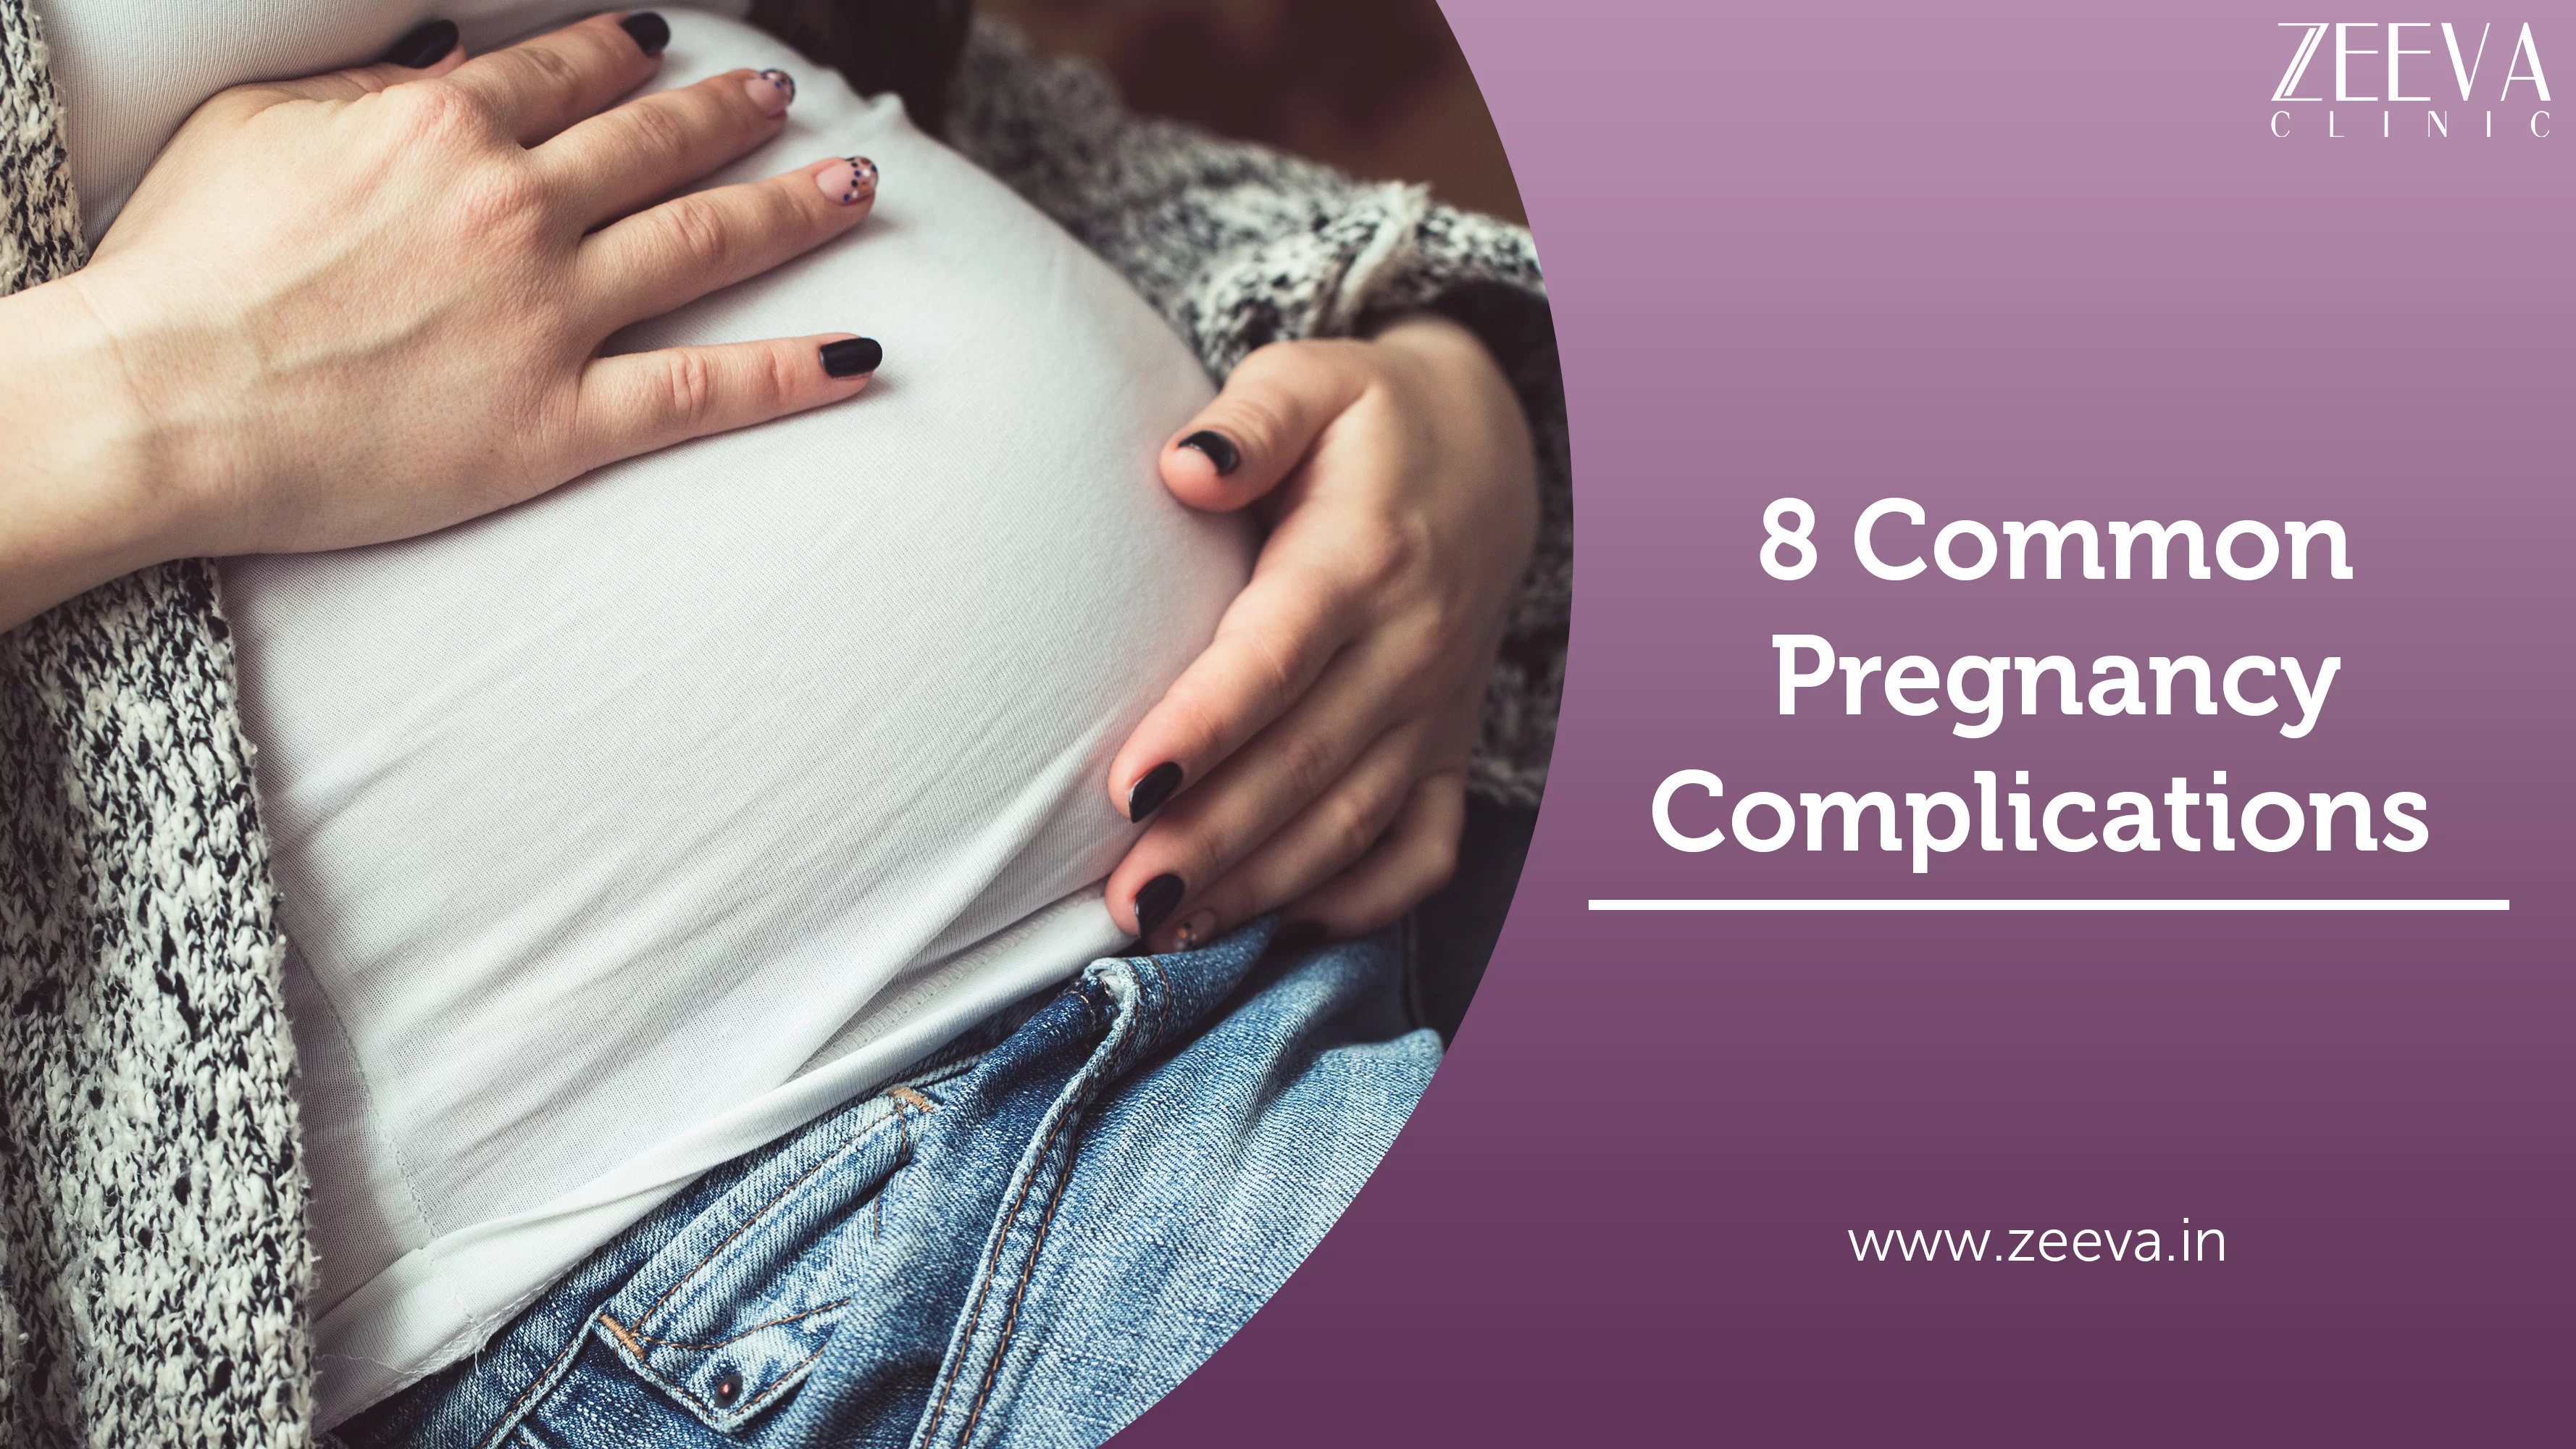 Complications of pregnancy